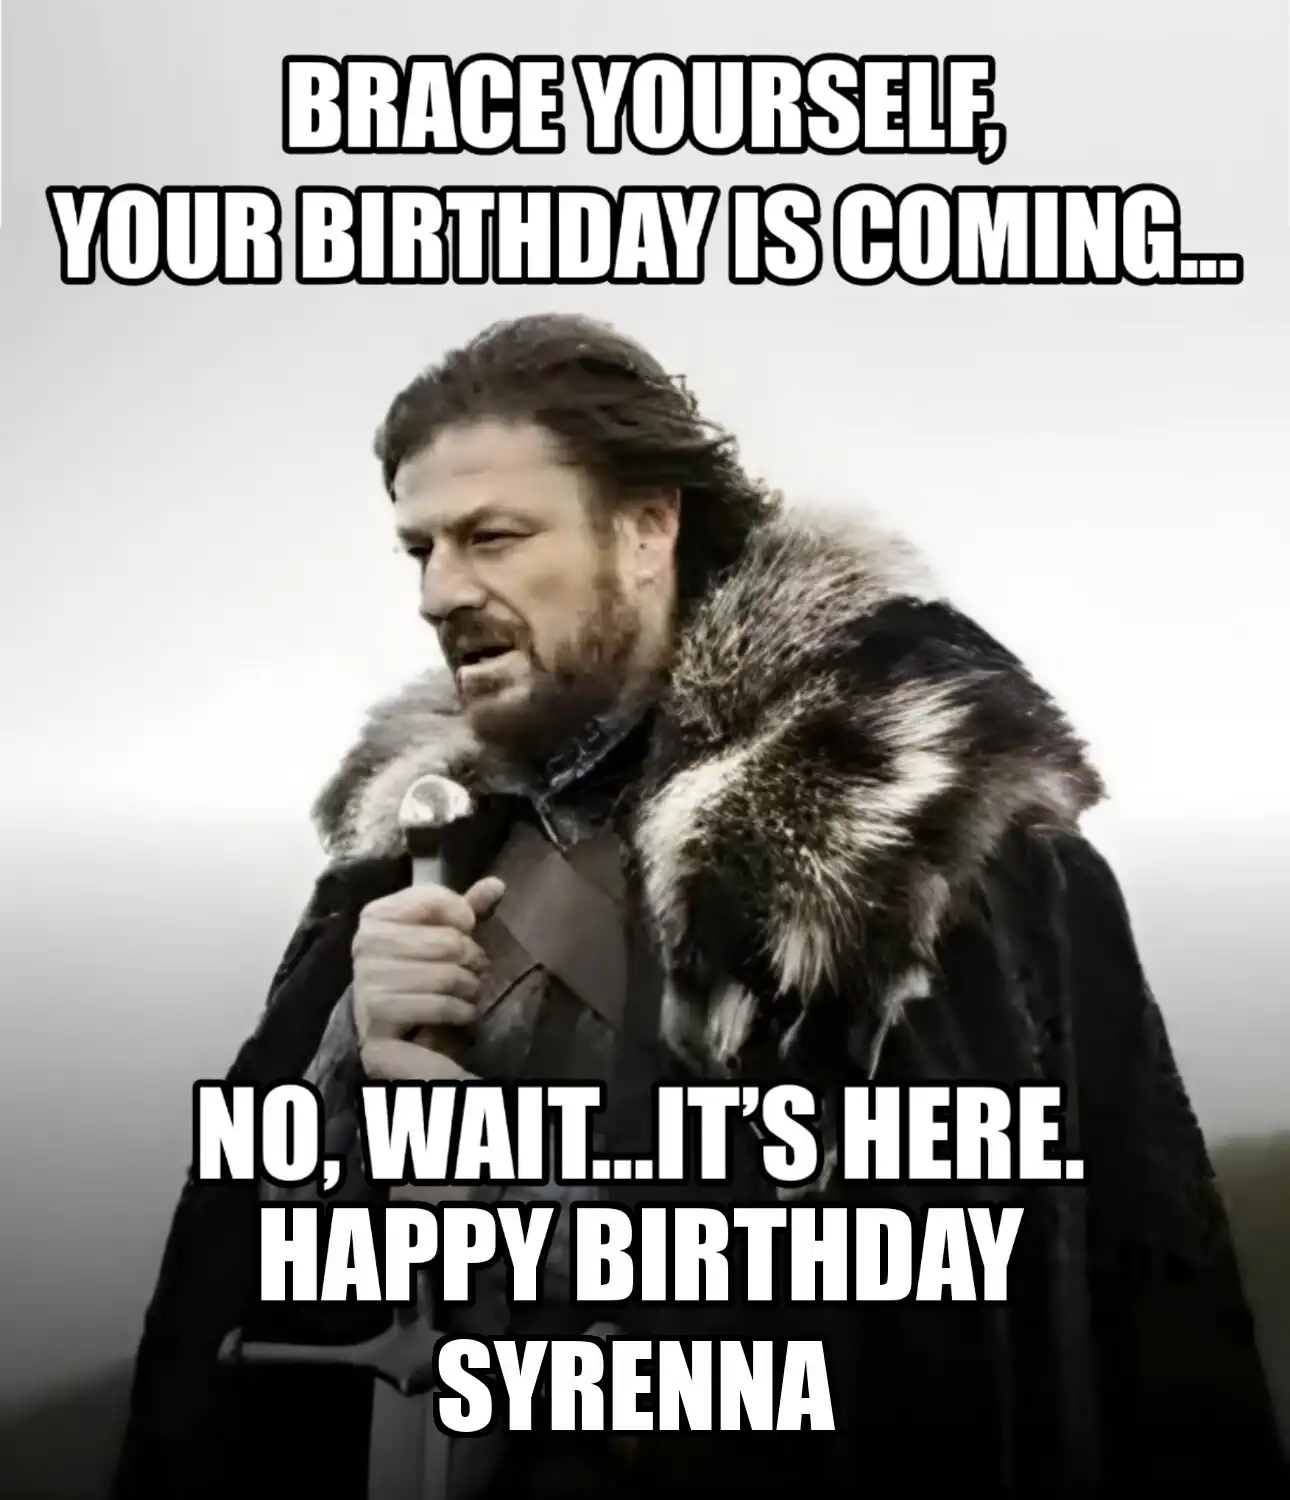 Happy Birthday Syrenna Brace Yourself Your Birthday Is Coming Meme